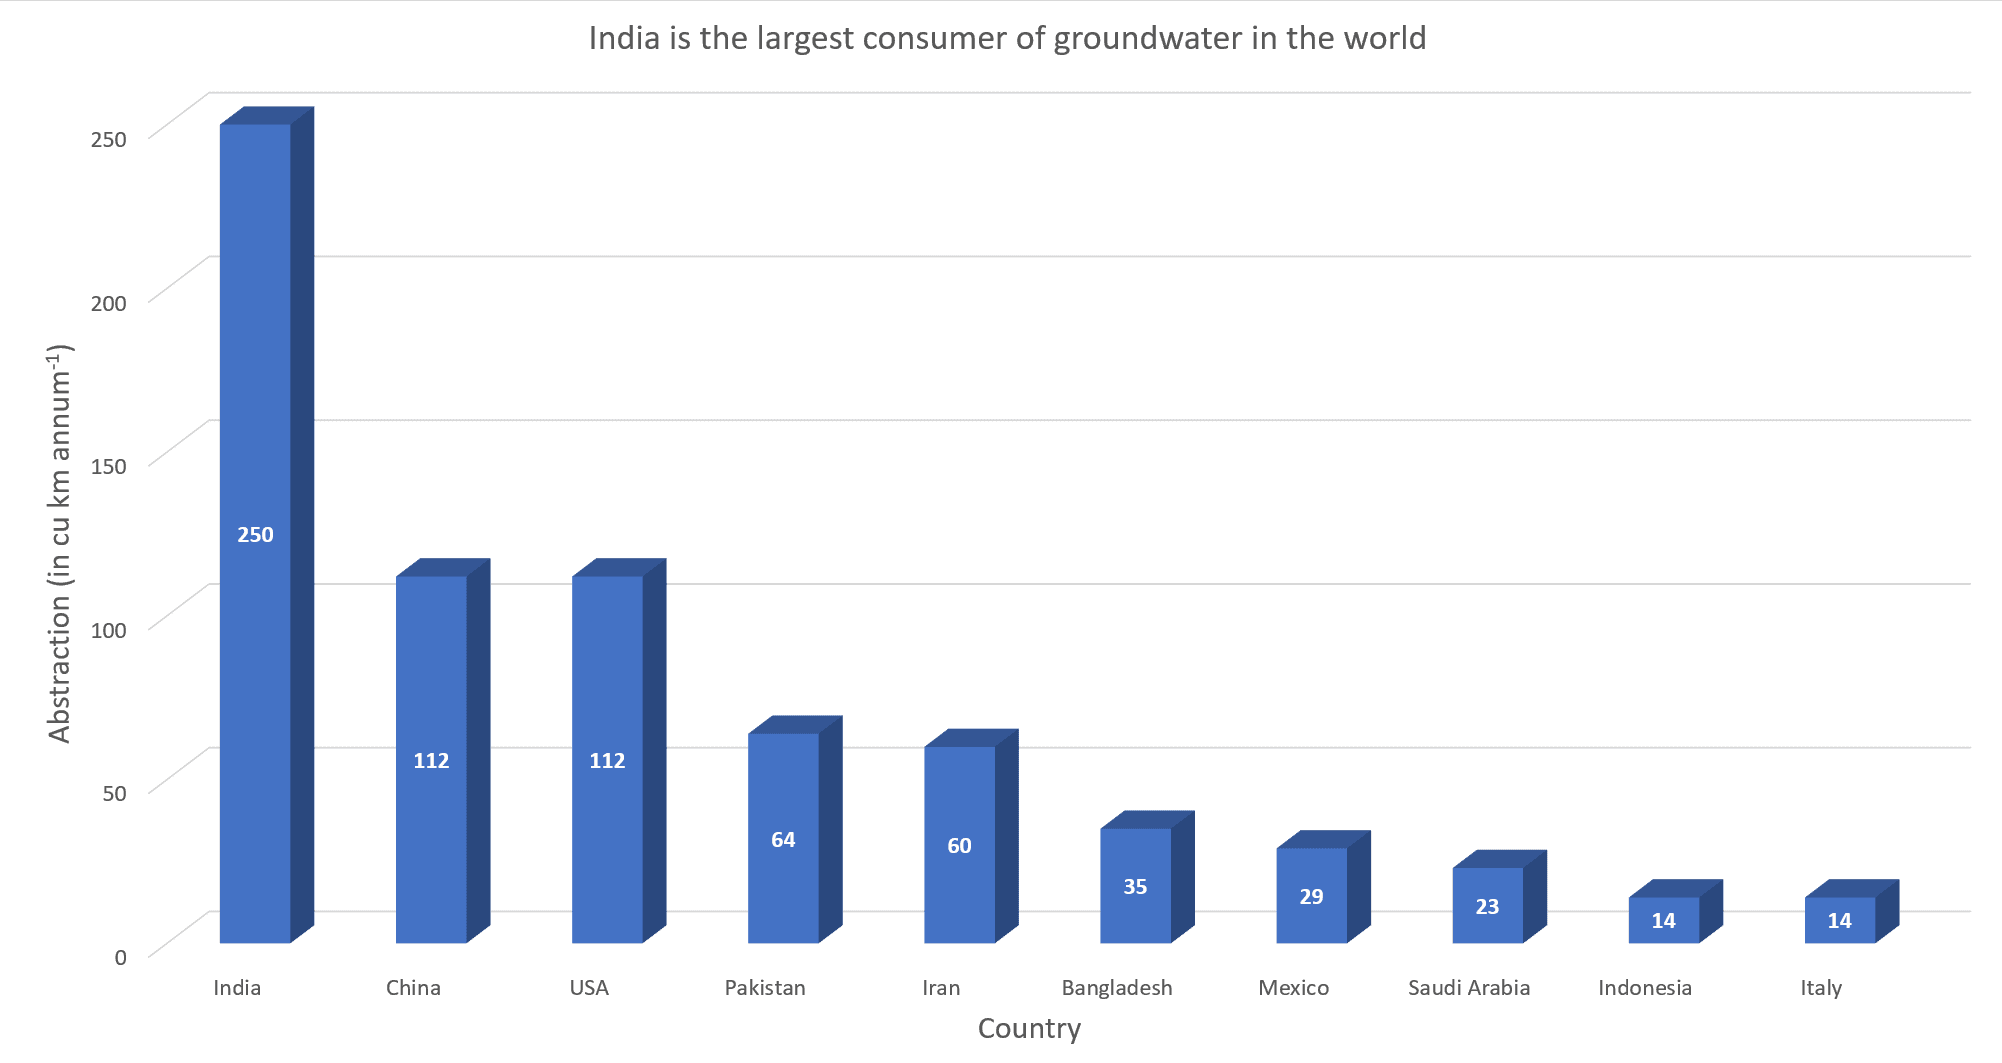 India is the largest consumer of Groundwater in the world